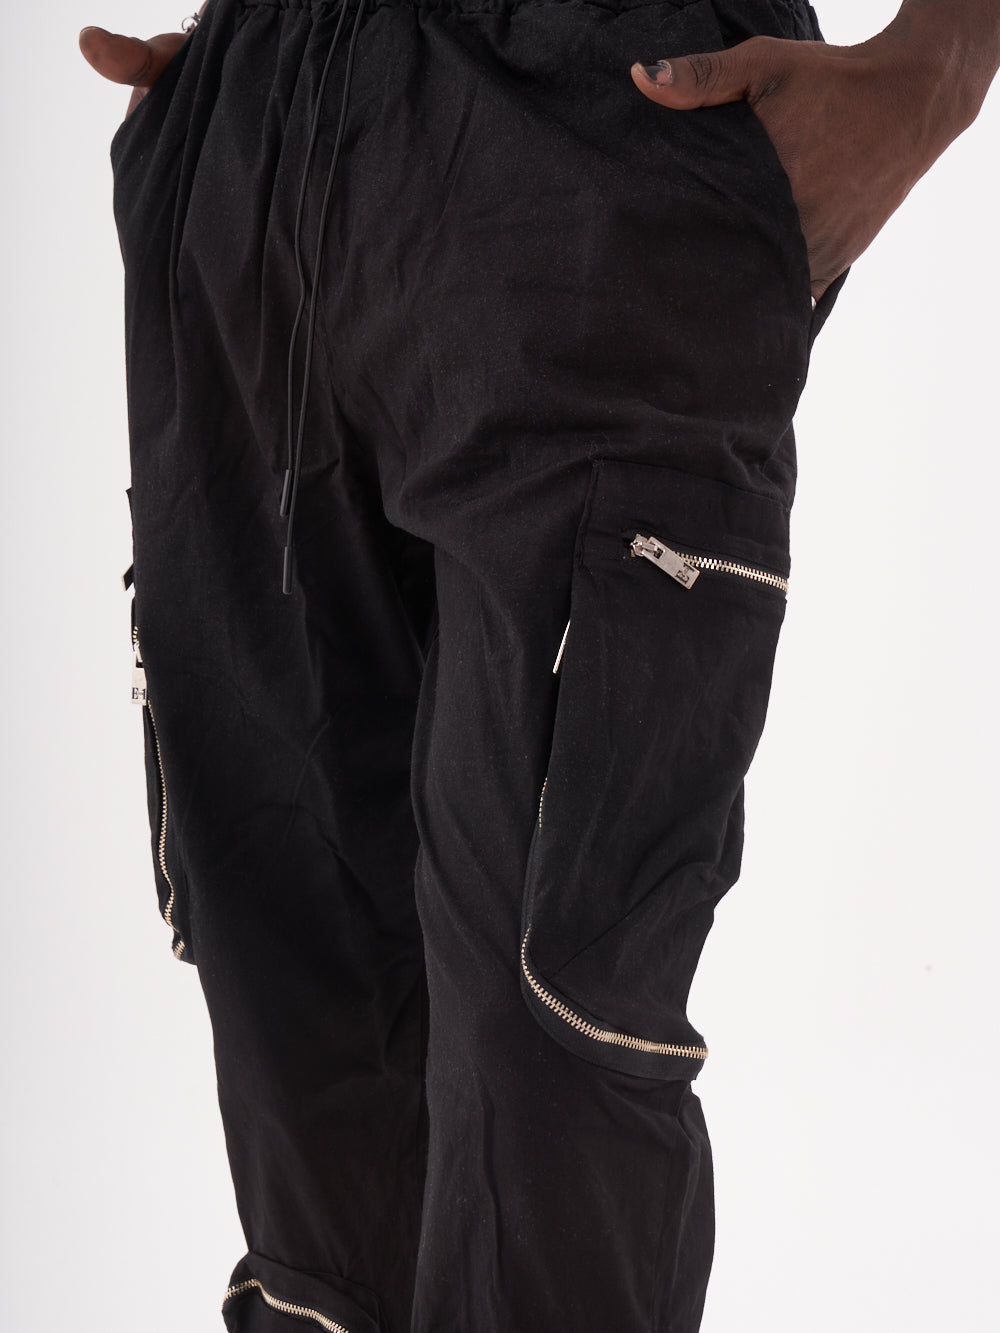 A man wearing black RAIDER JOGGERS with zippers.